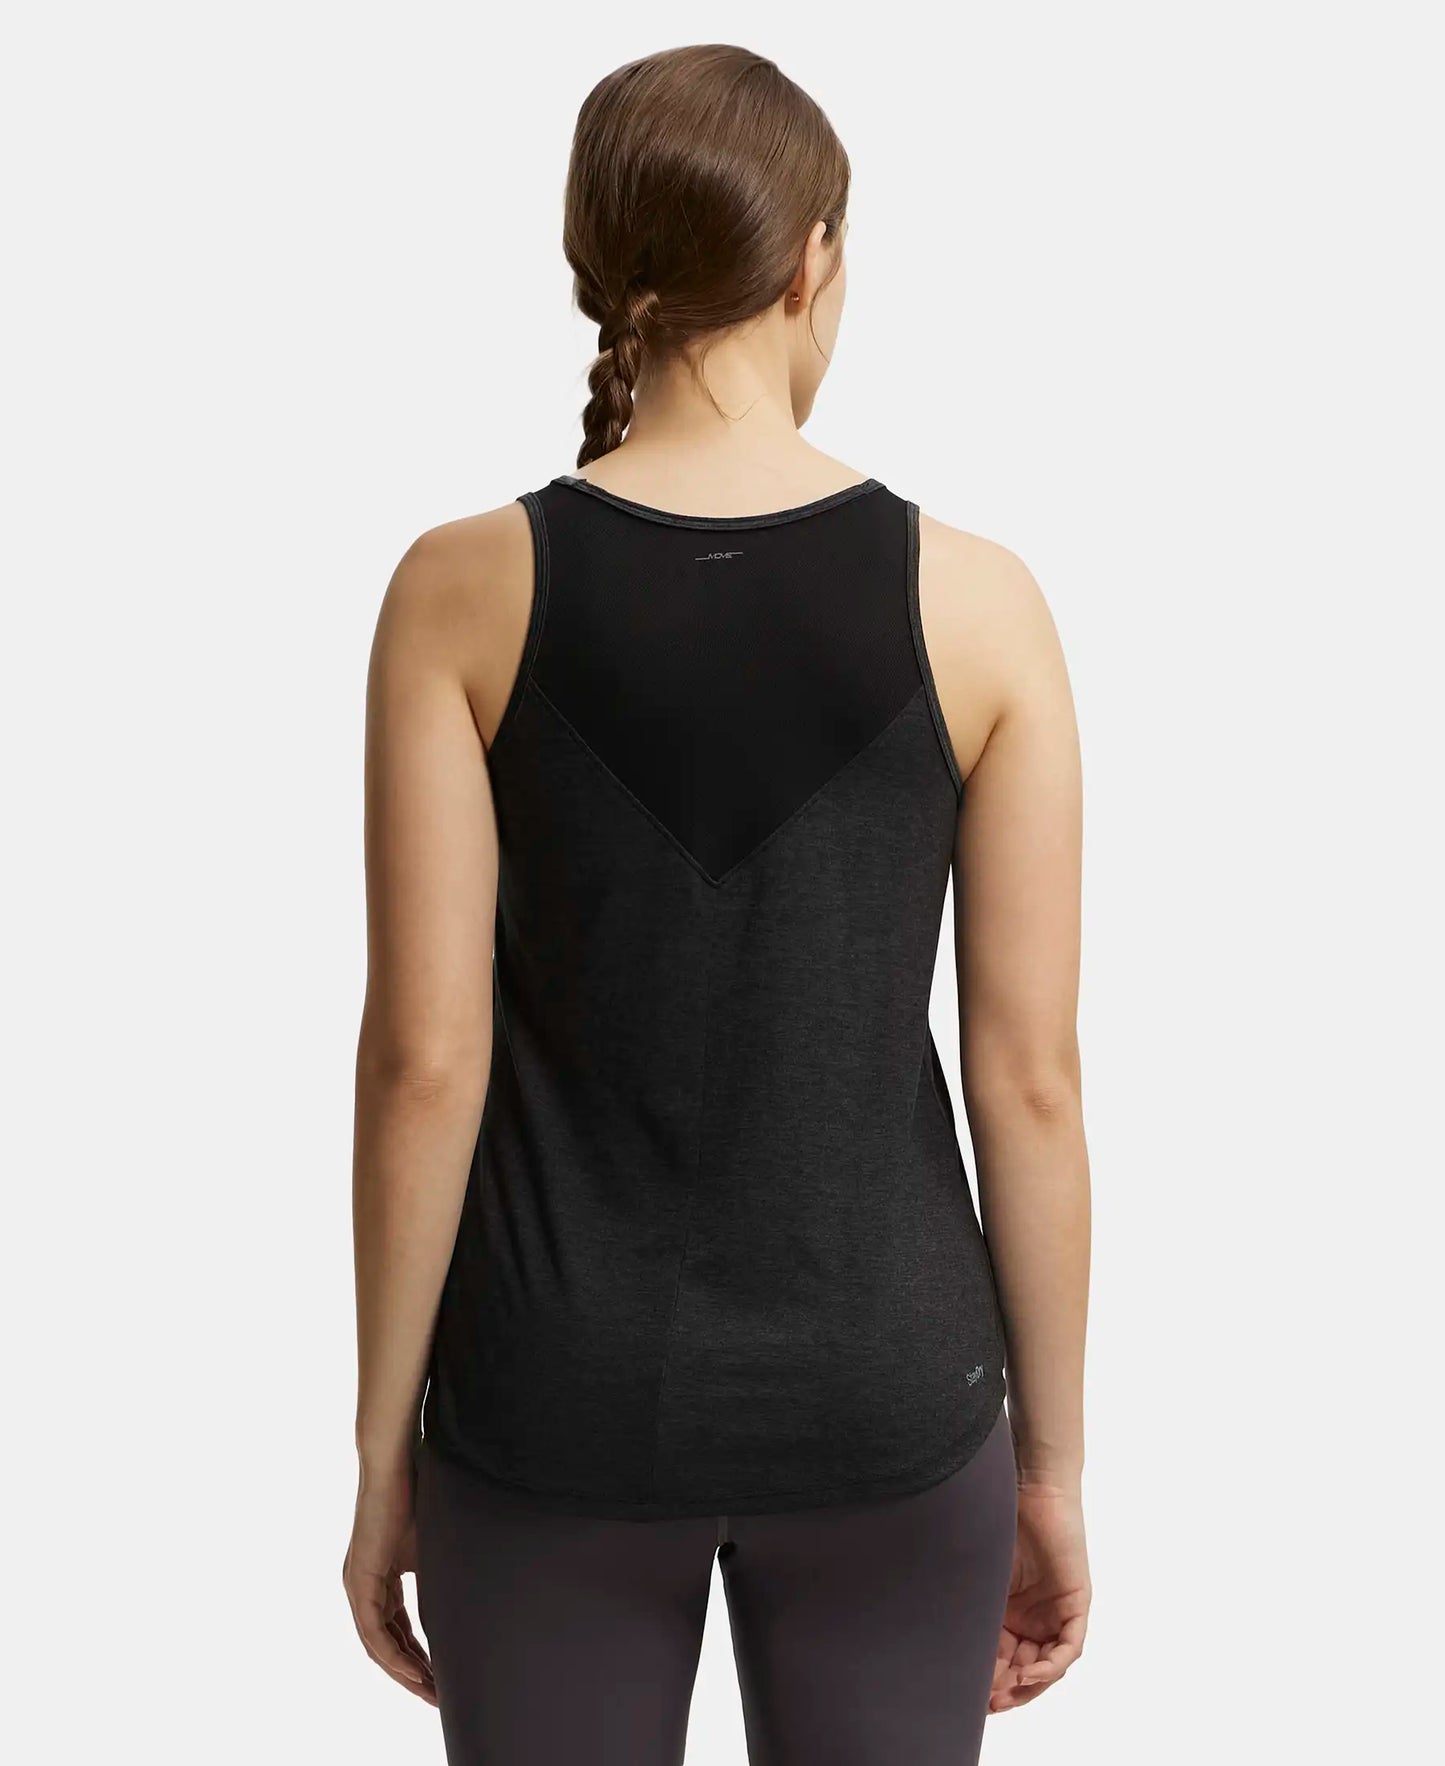 Microfiber Fabric Graphic Printed Tank Top With Breathable Mesh - Black-3